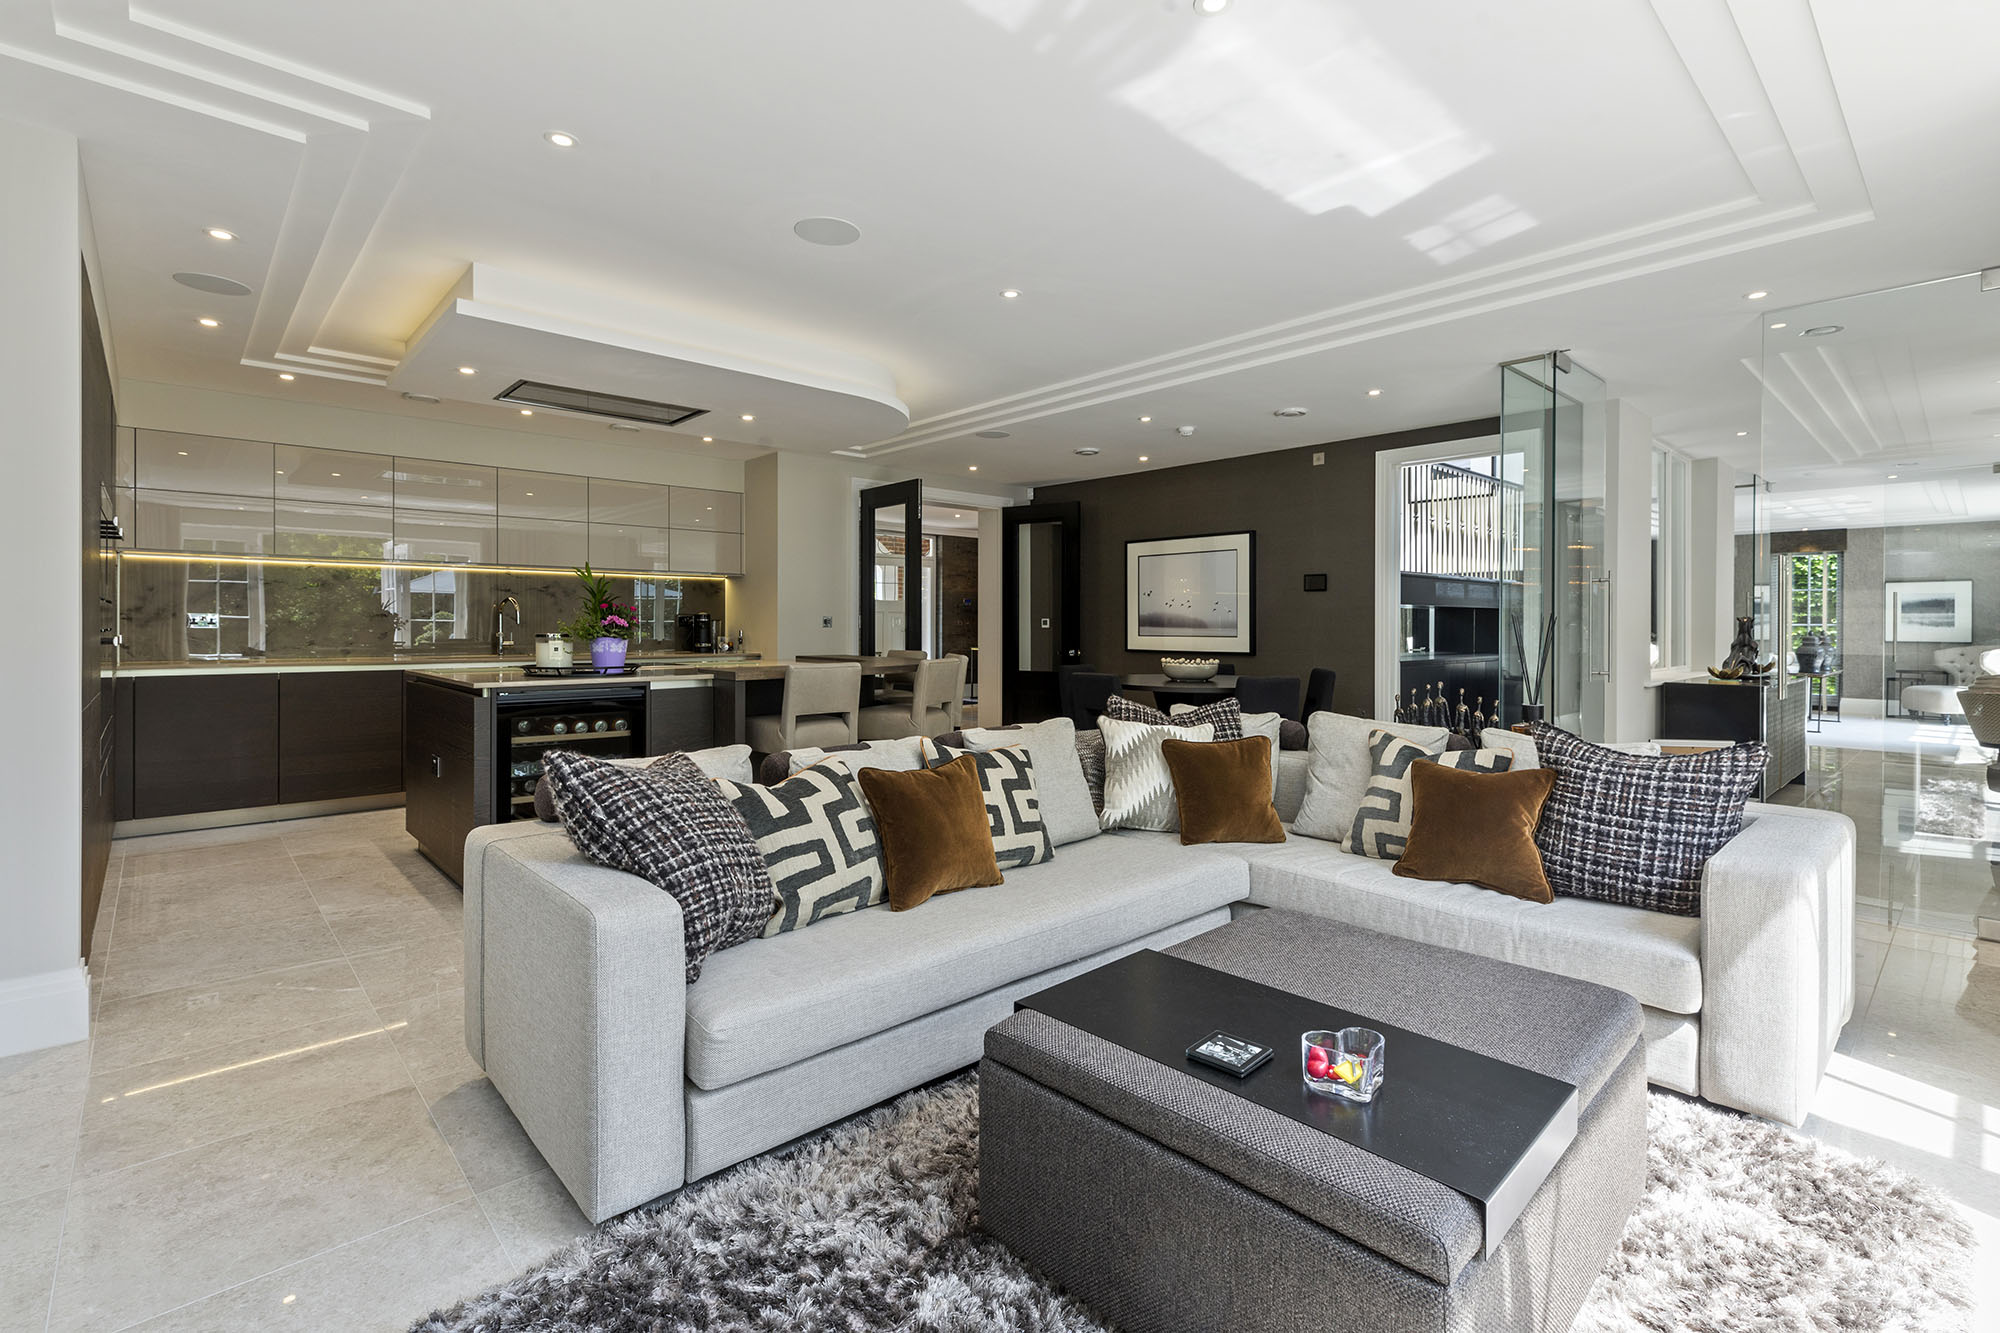 Bespoke Architecture & Interiors from Luxury Property Developers Octagon